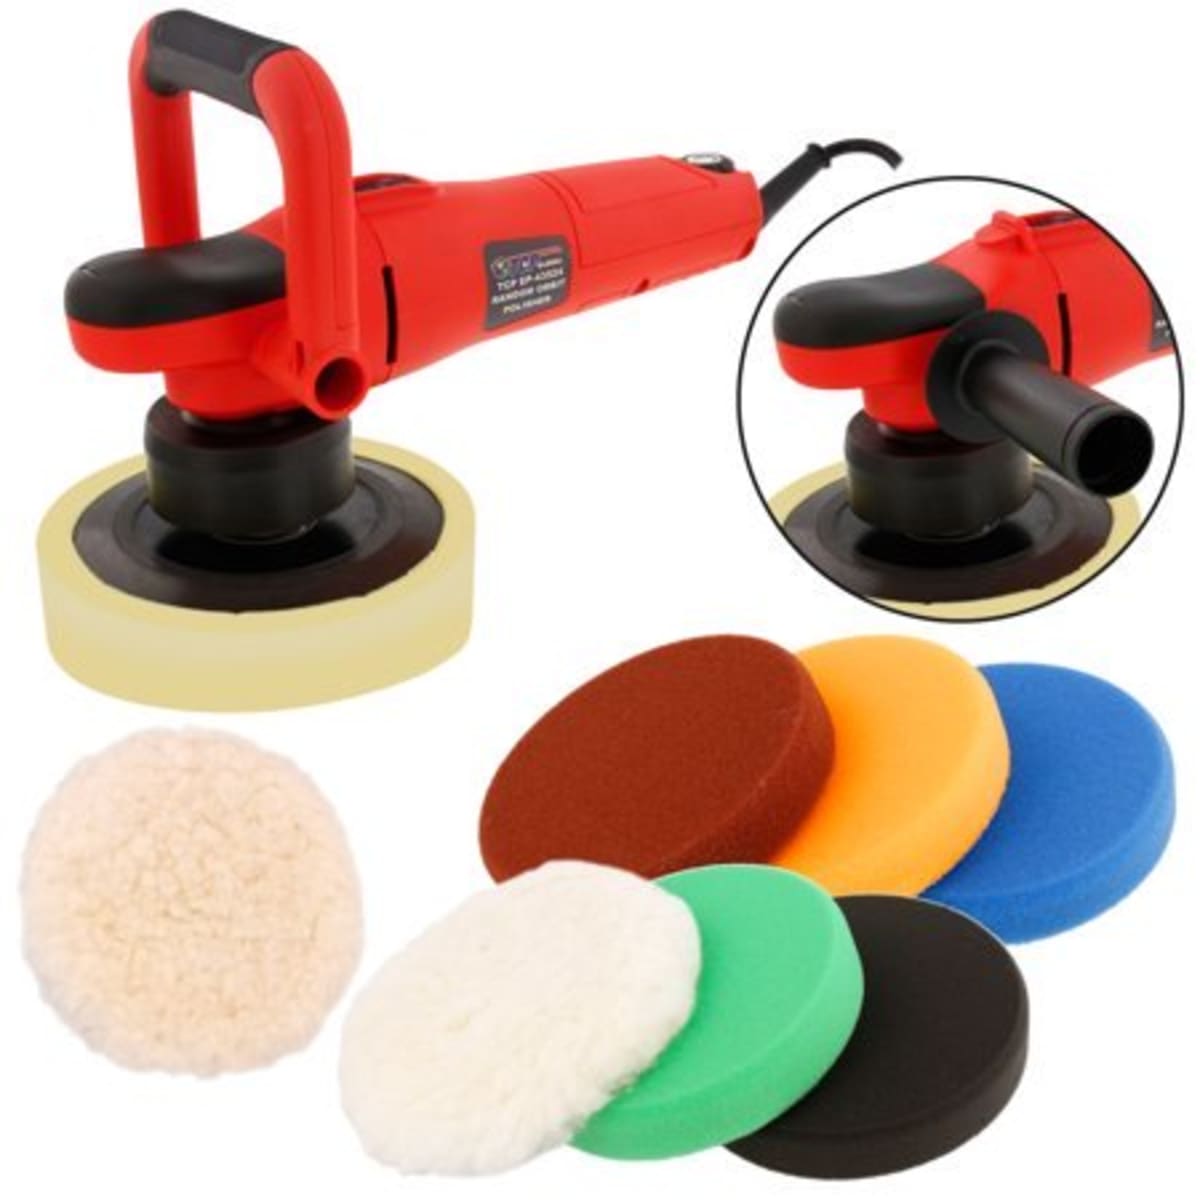 Single Polishers Pads Polishing wheel Cleaning tools Accessories Durable 